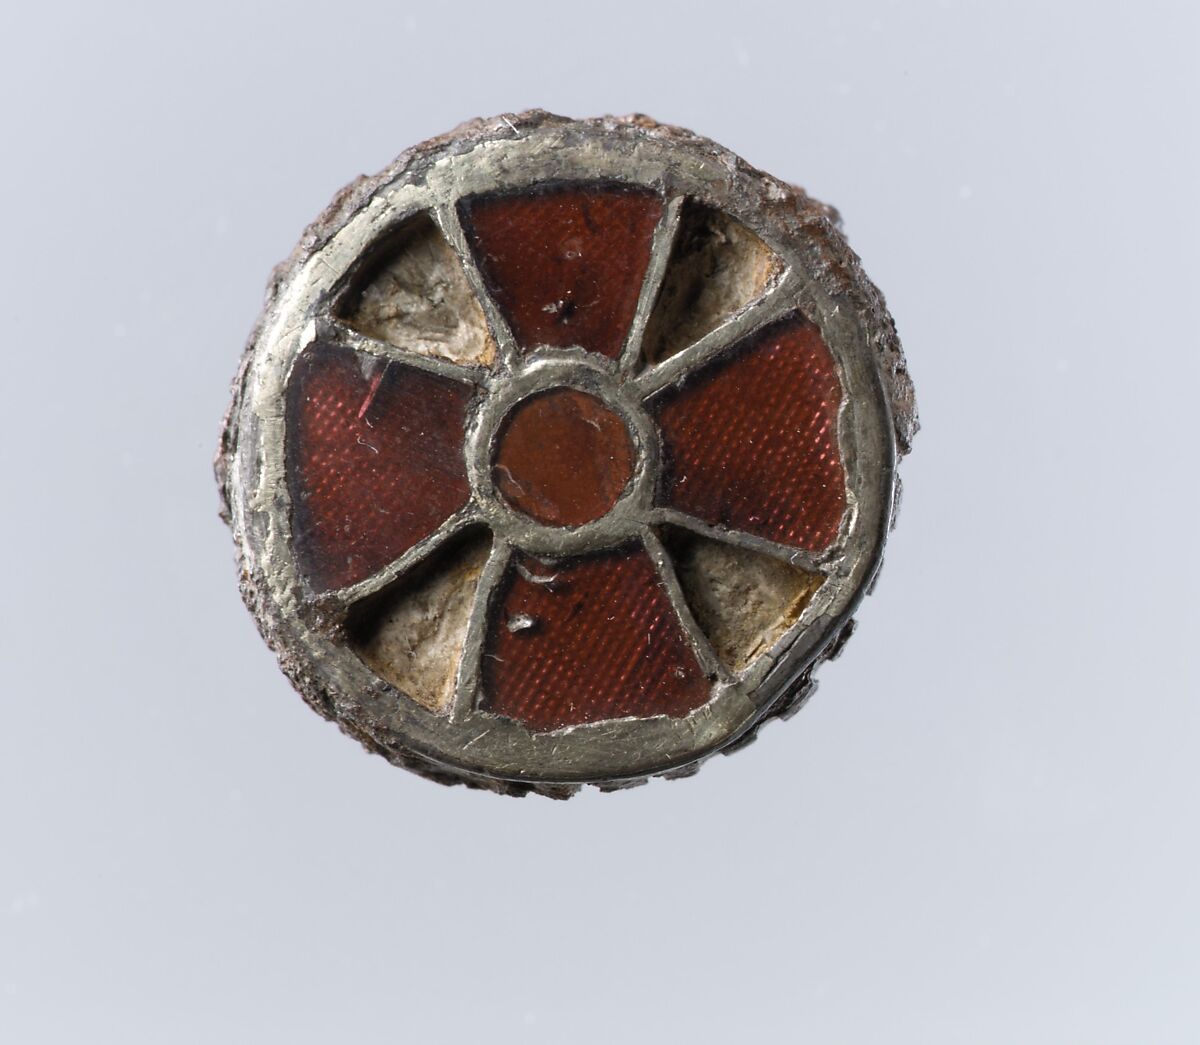 Disk Brooch, Silver-gilt on iron core, metal foil, inlaid garnet or paste, Frankish 